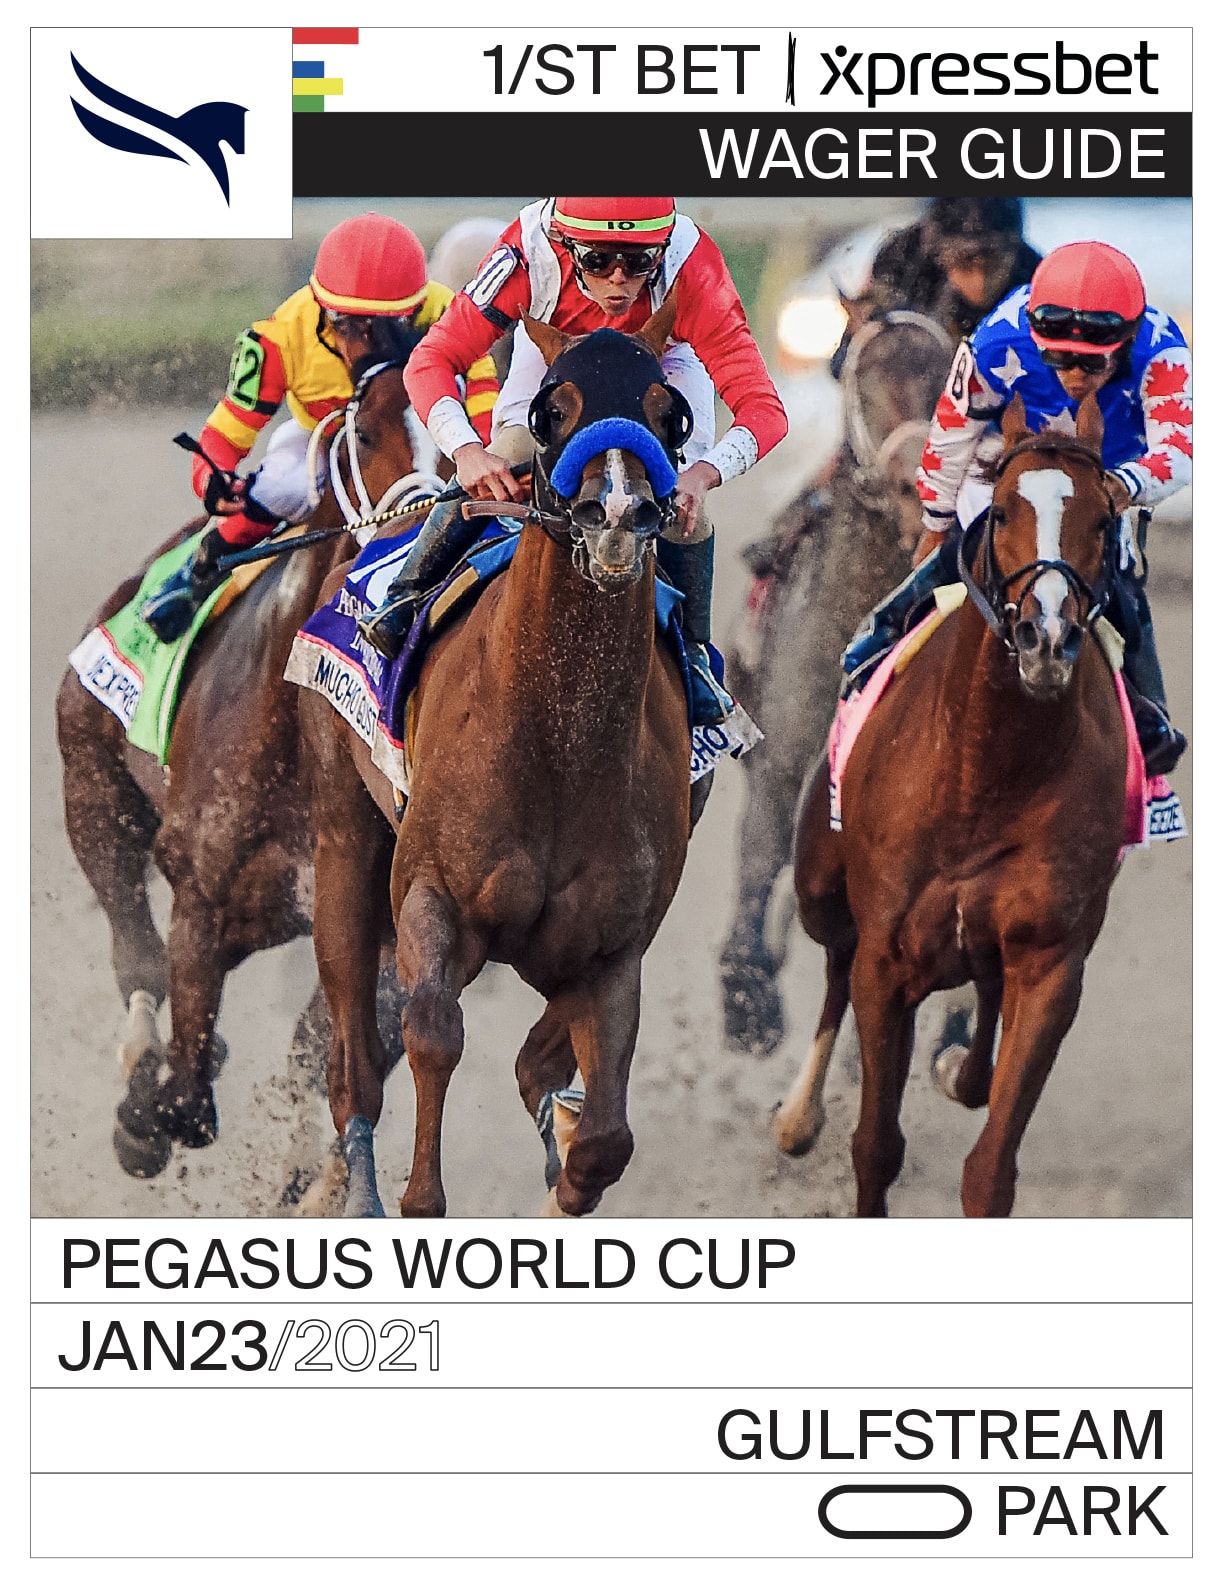 2021 Pegasus World Cup Wager Guide | Xpressbet